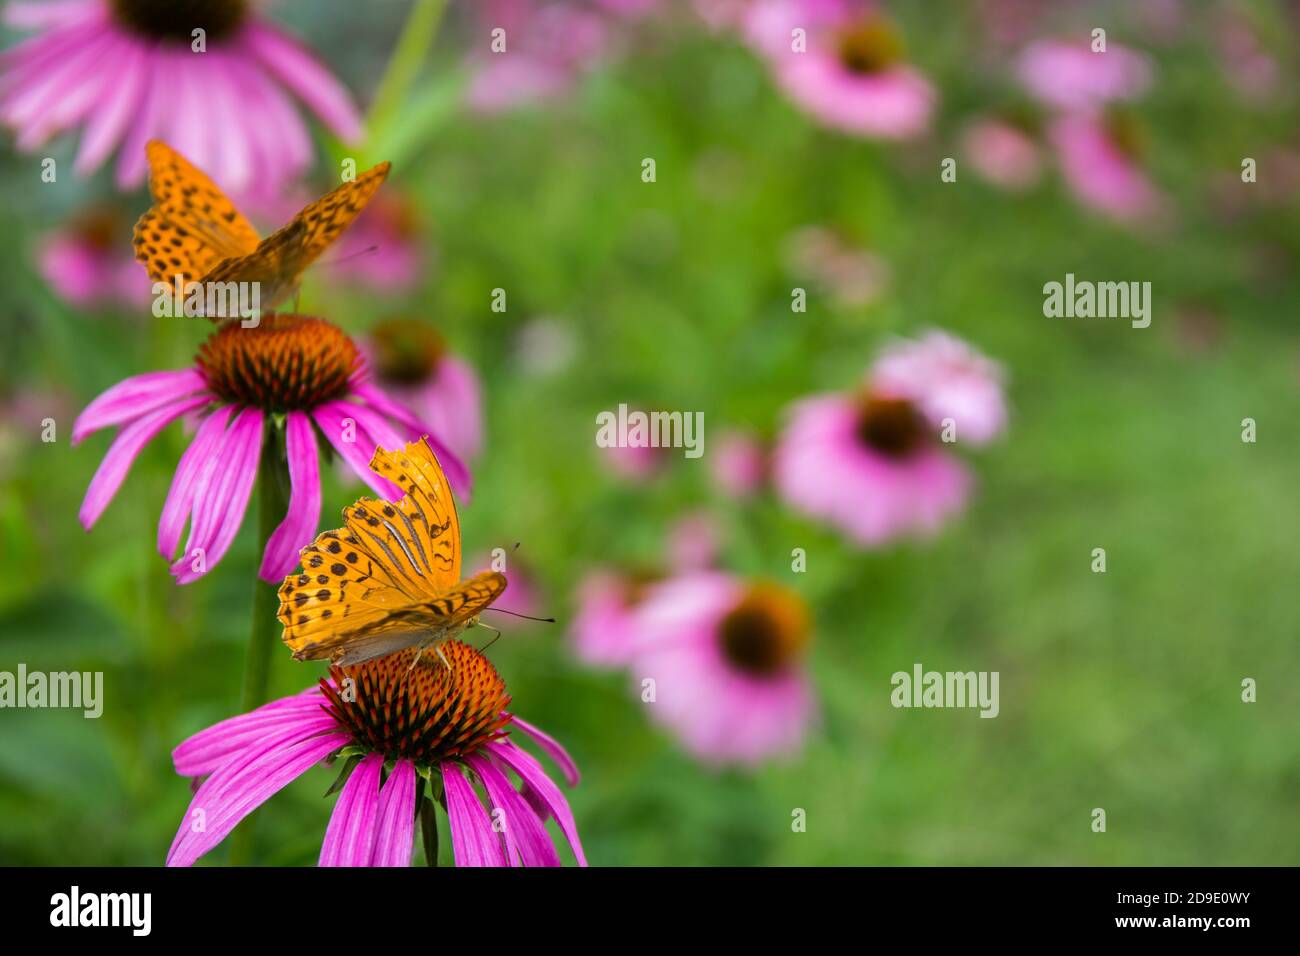 Yellow and orange Butterfly sitting on a Cone Flower Echinacea Purpurea Stock Photo